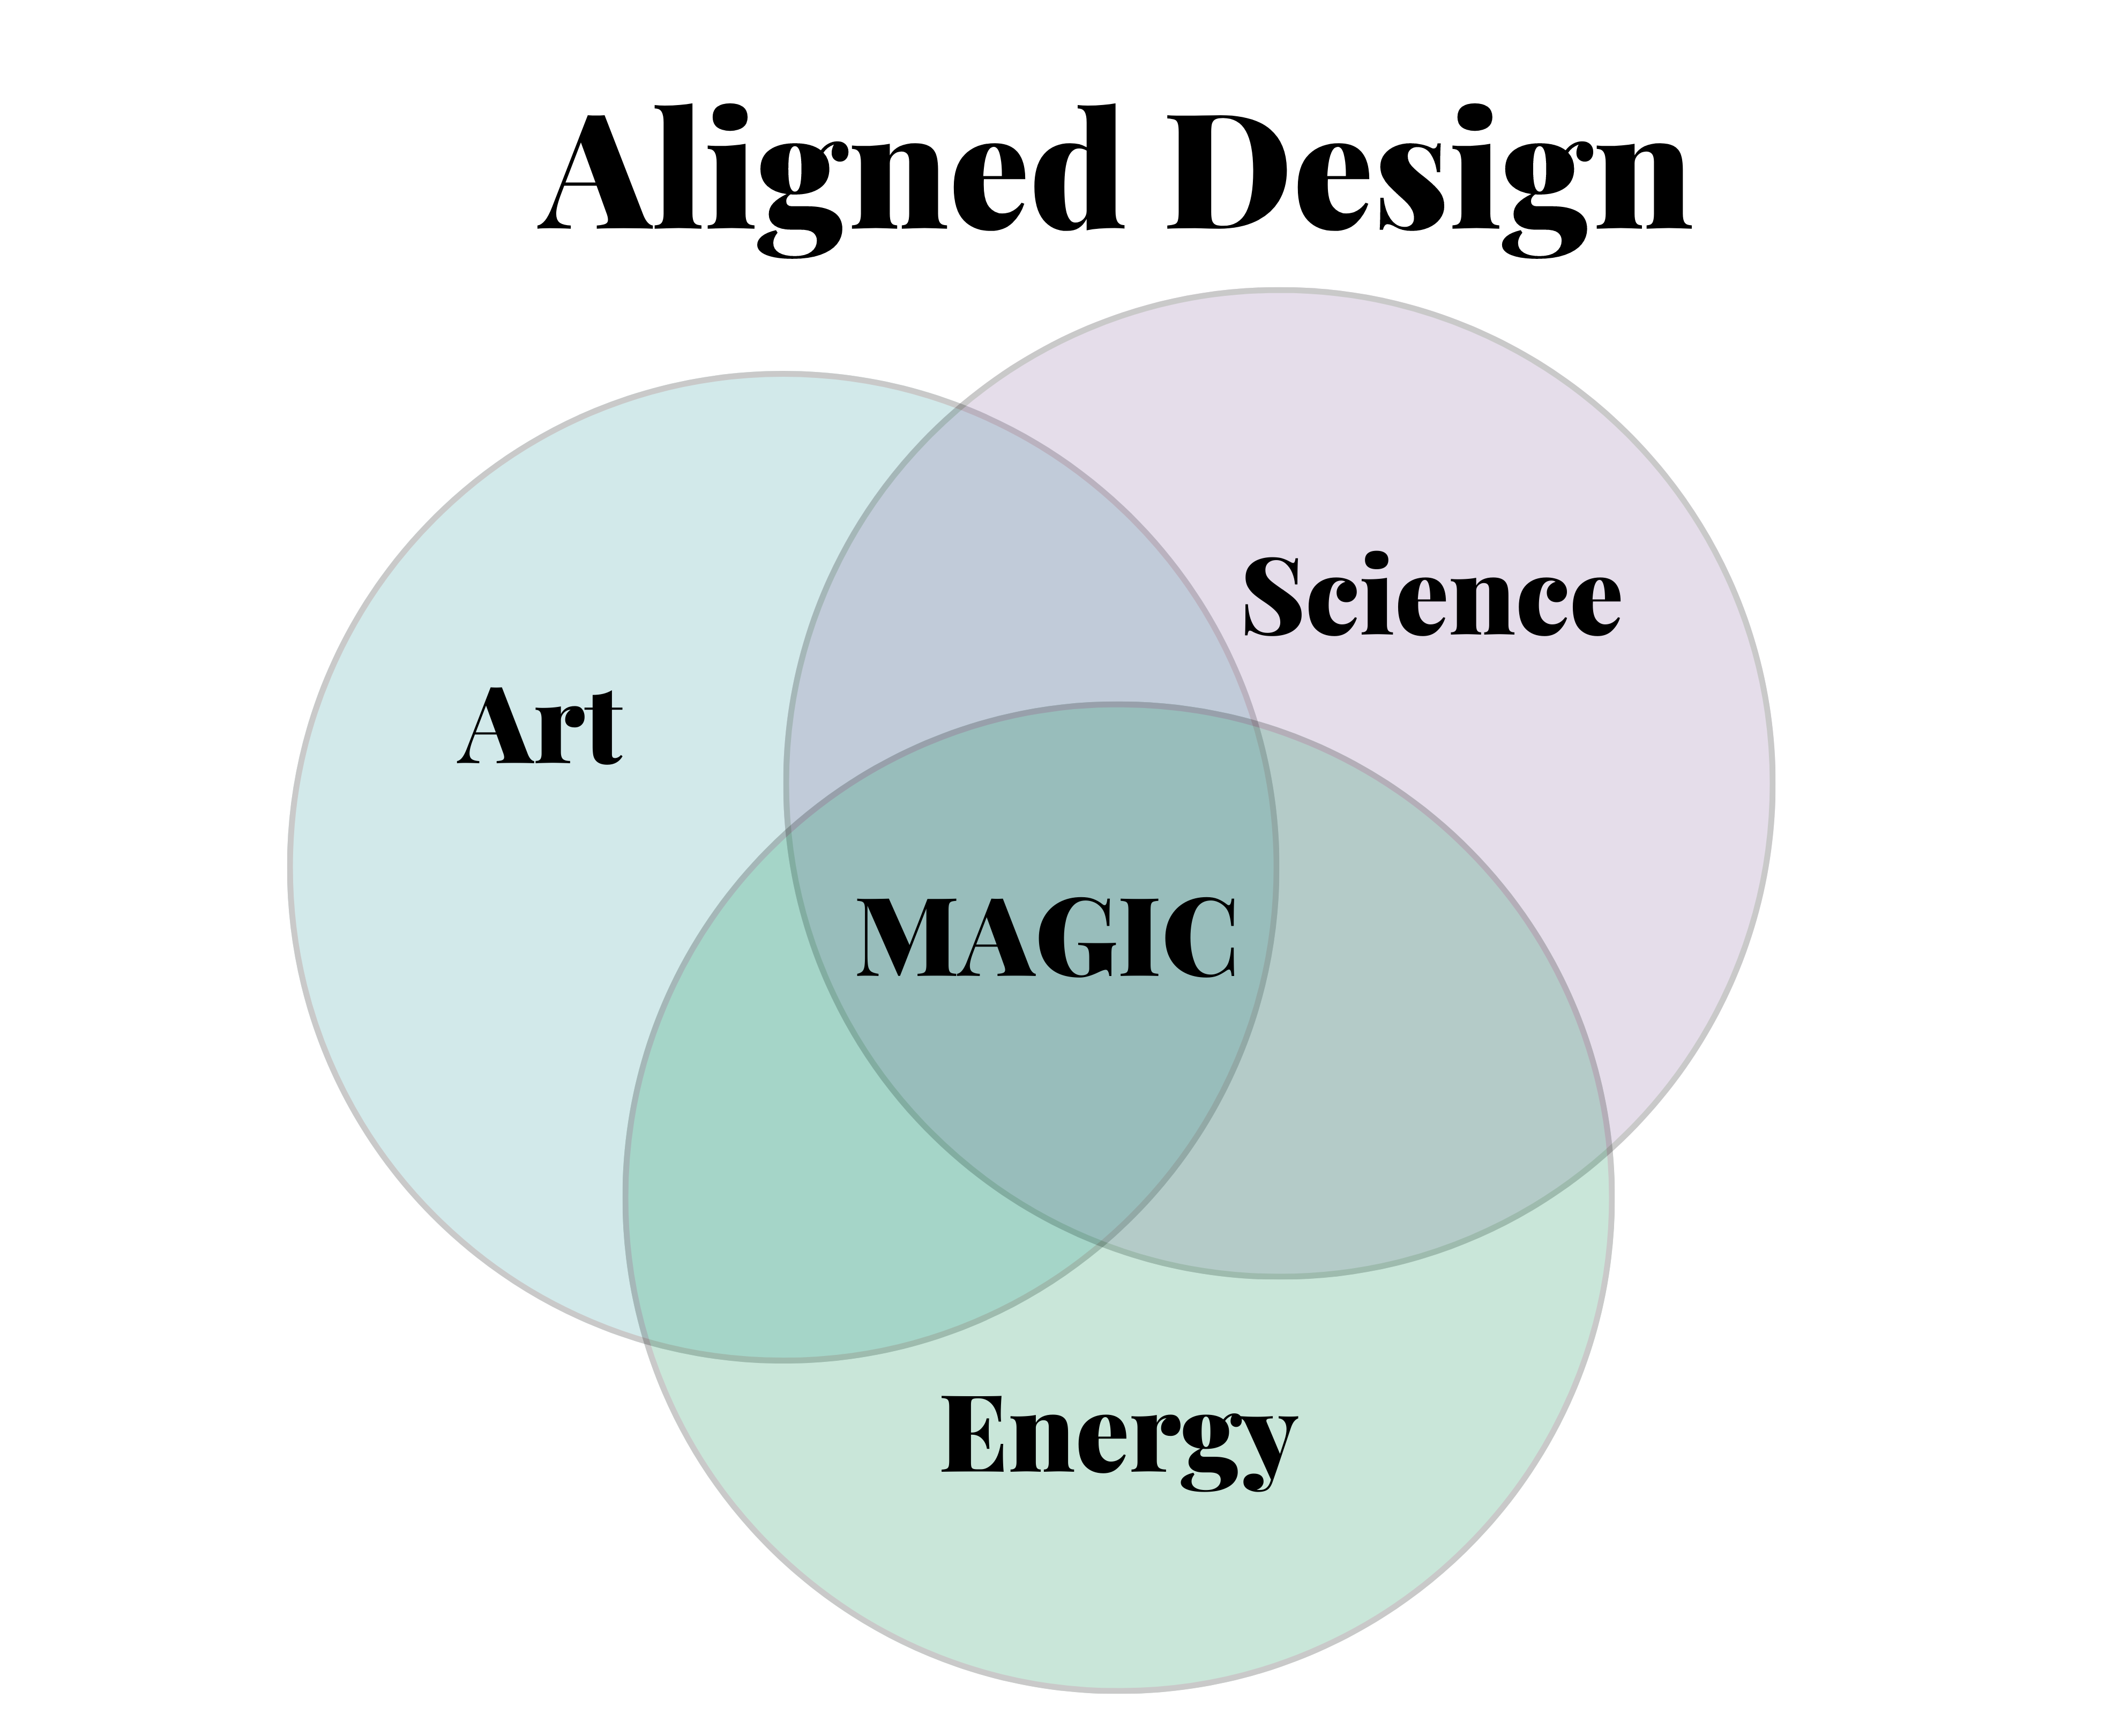 Aligned Design aligns art, science and energy together to create magic in your home and life.